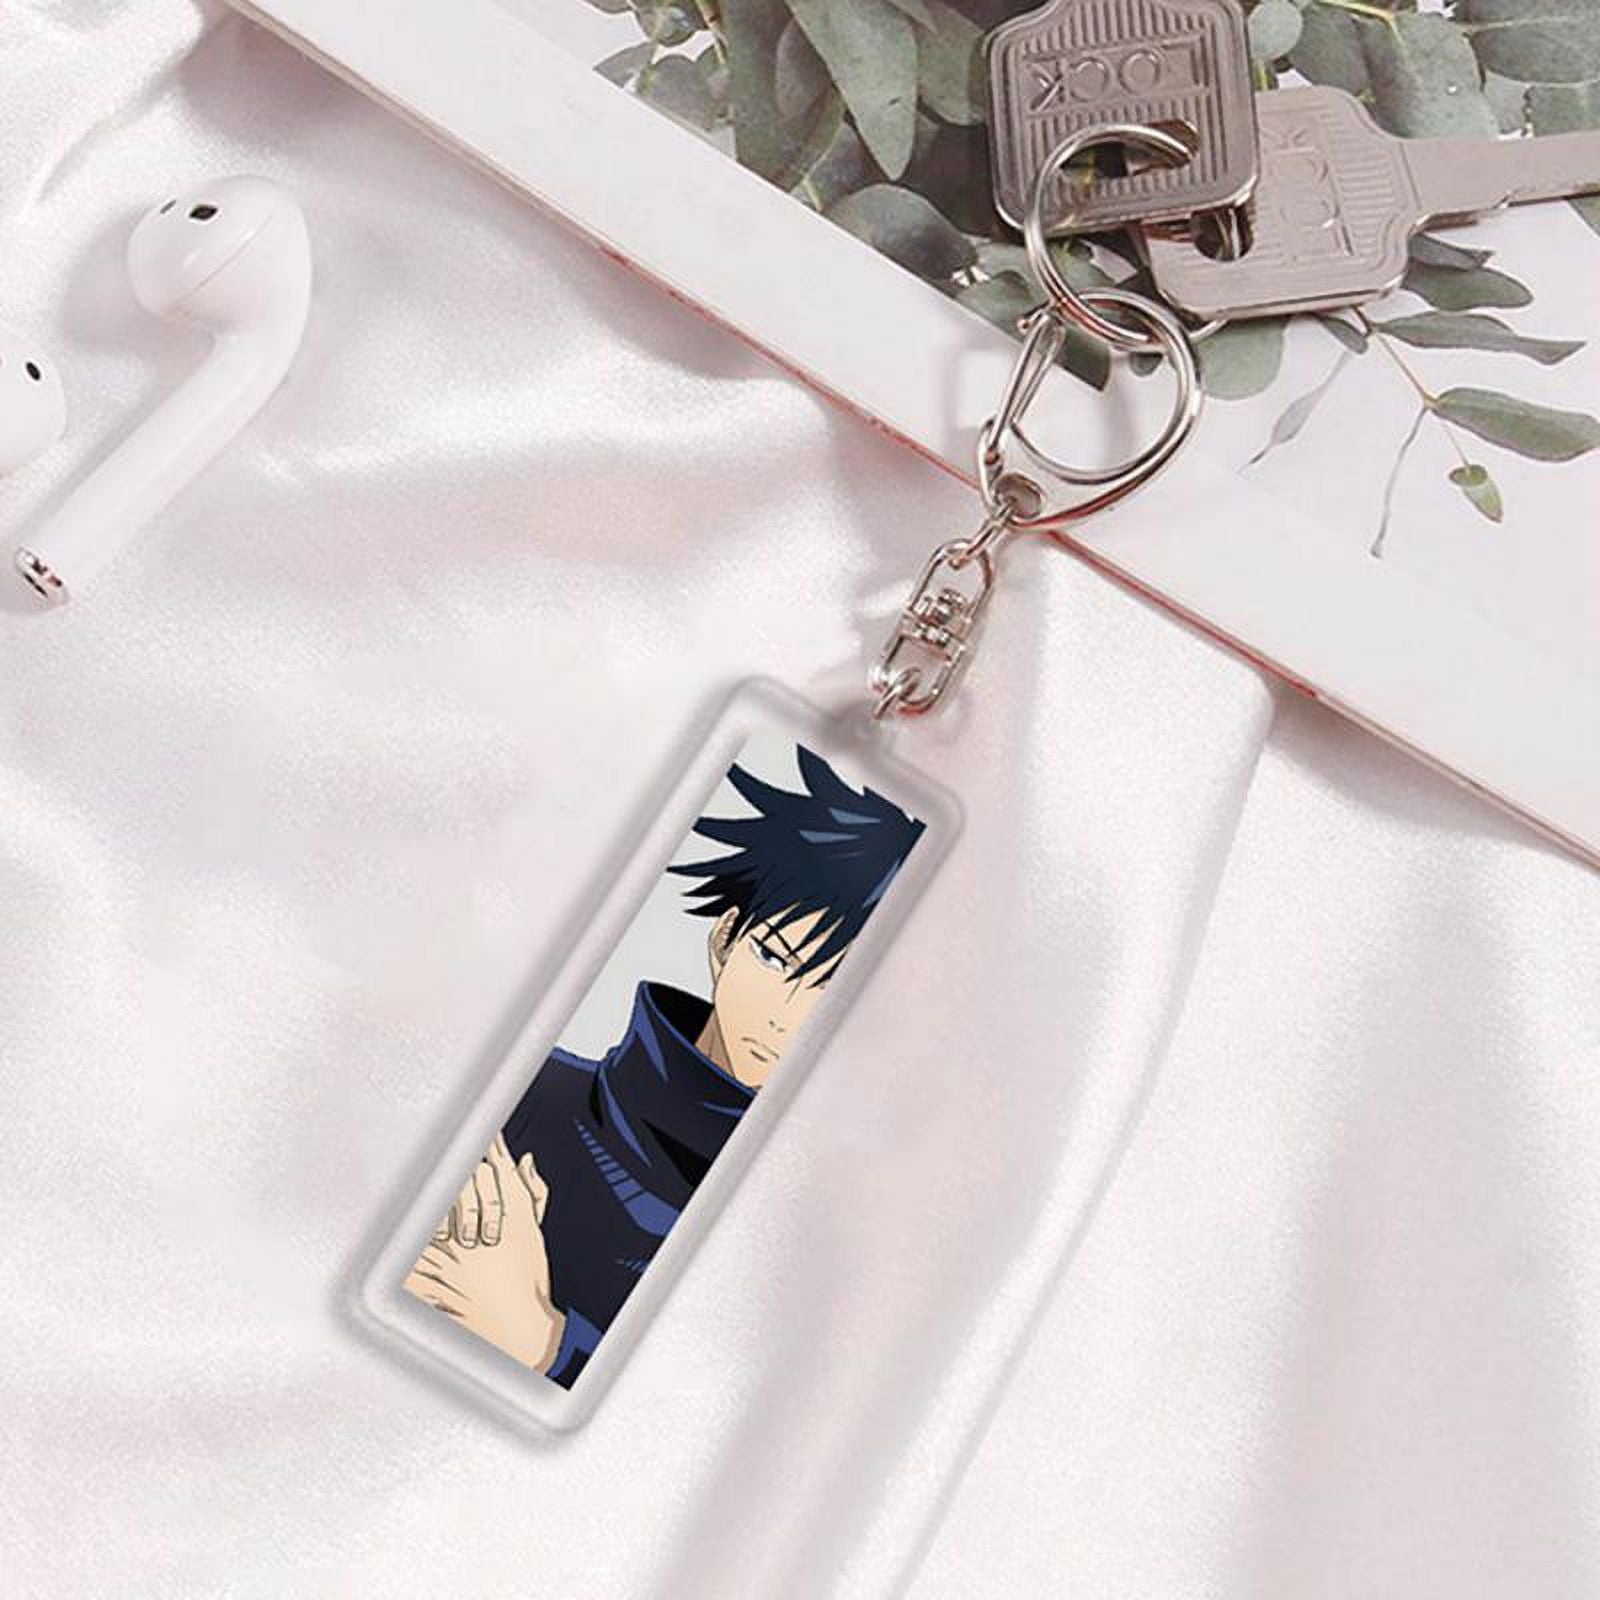 Jujutsu Kaisen PVC Bleach Keychain Classic Cartoon Anime Figure Double  Sided Key Ring For Bags, Fans, And Collectors Perfect Key Holder And Gift  From Youne, $1.12